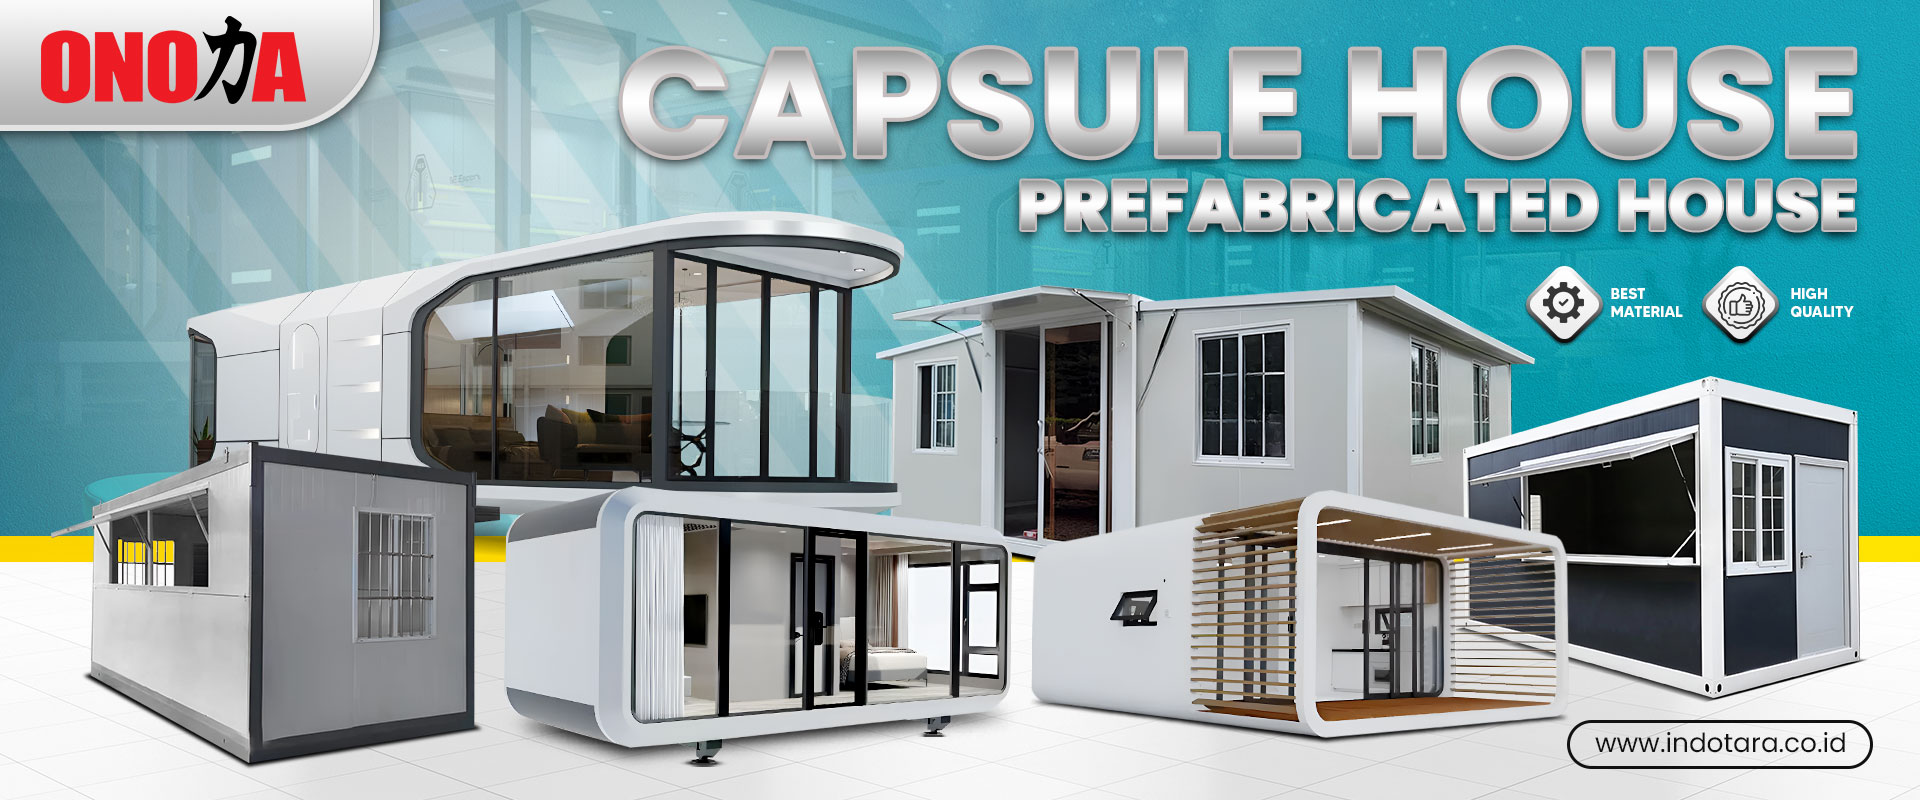 Jual capsule house and prefabricated house